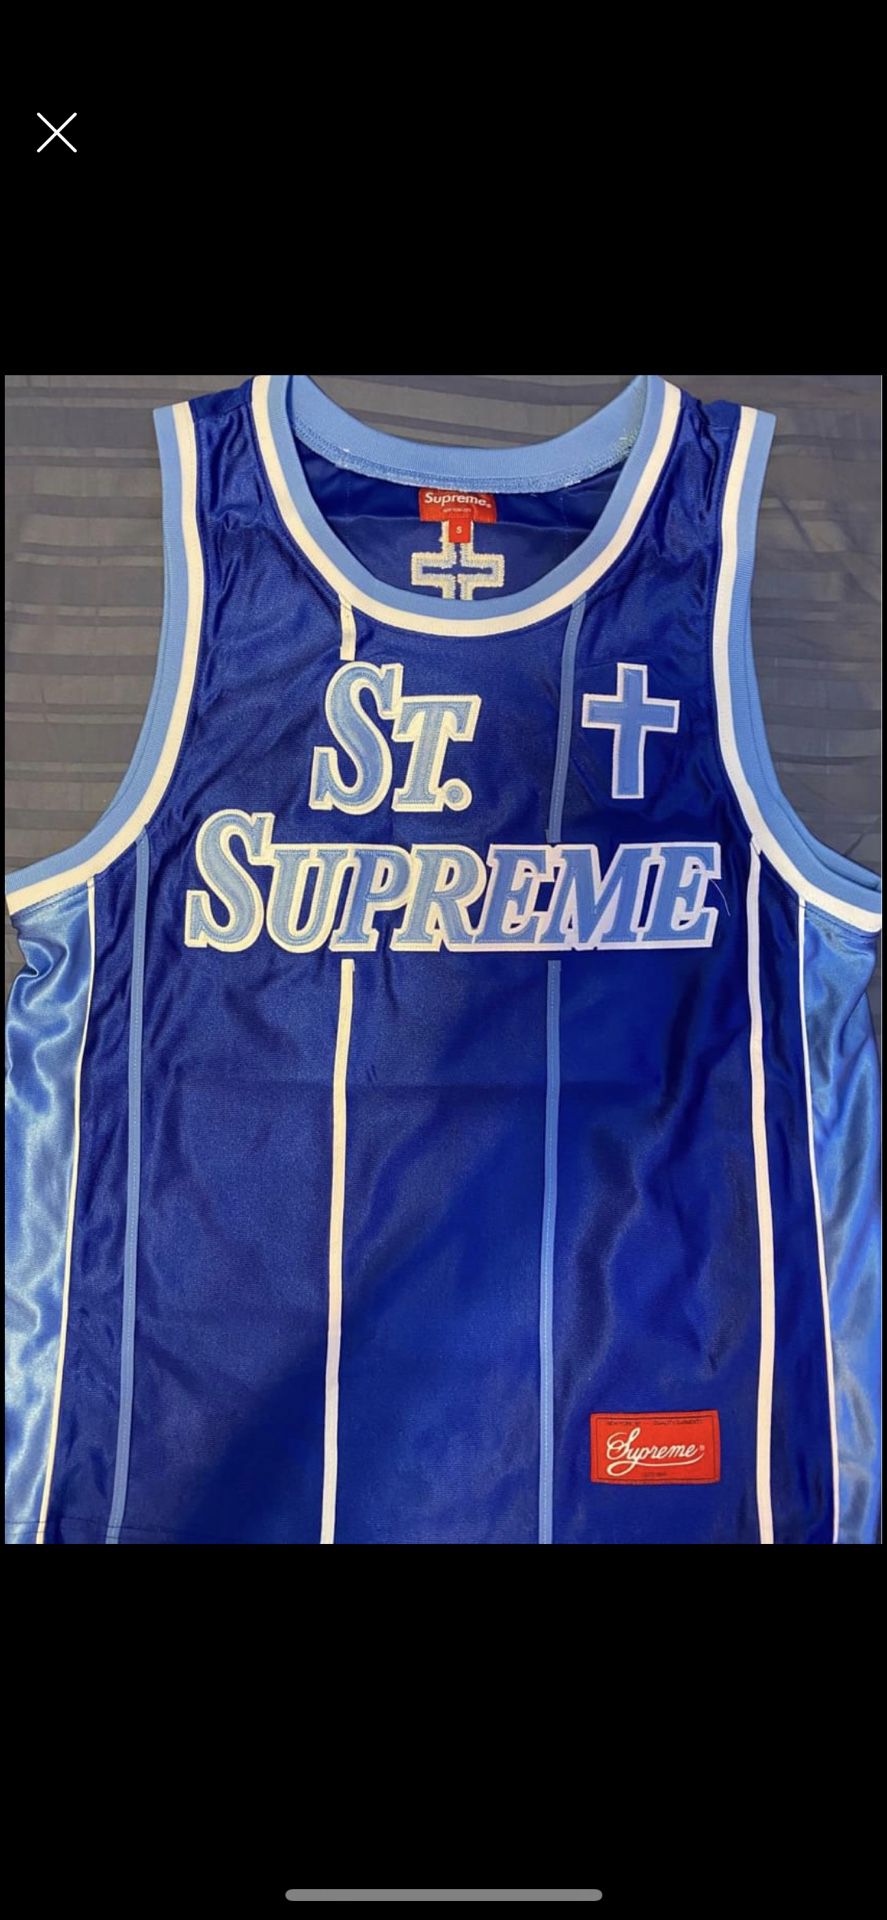 Supreme St. Supreme basketball Jersey size small for Sale in